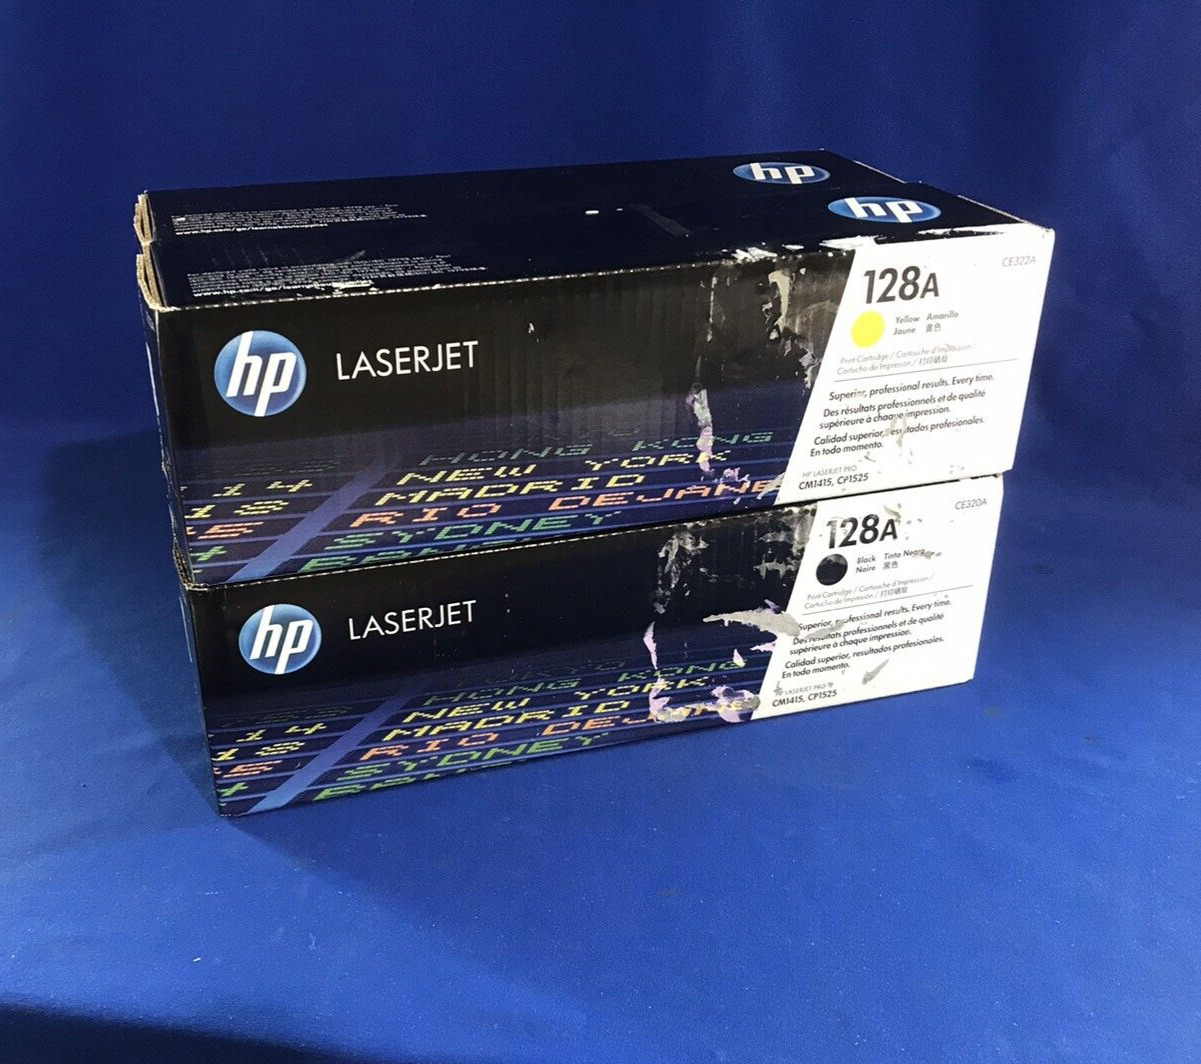 Pack of 4 HP Laserjet 128A Print Cartridges for CM1415, CP1525